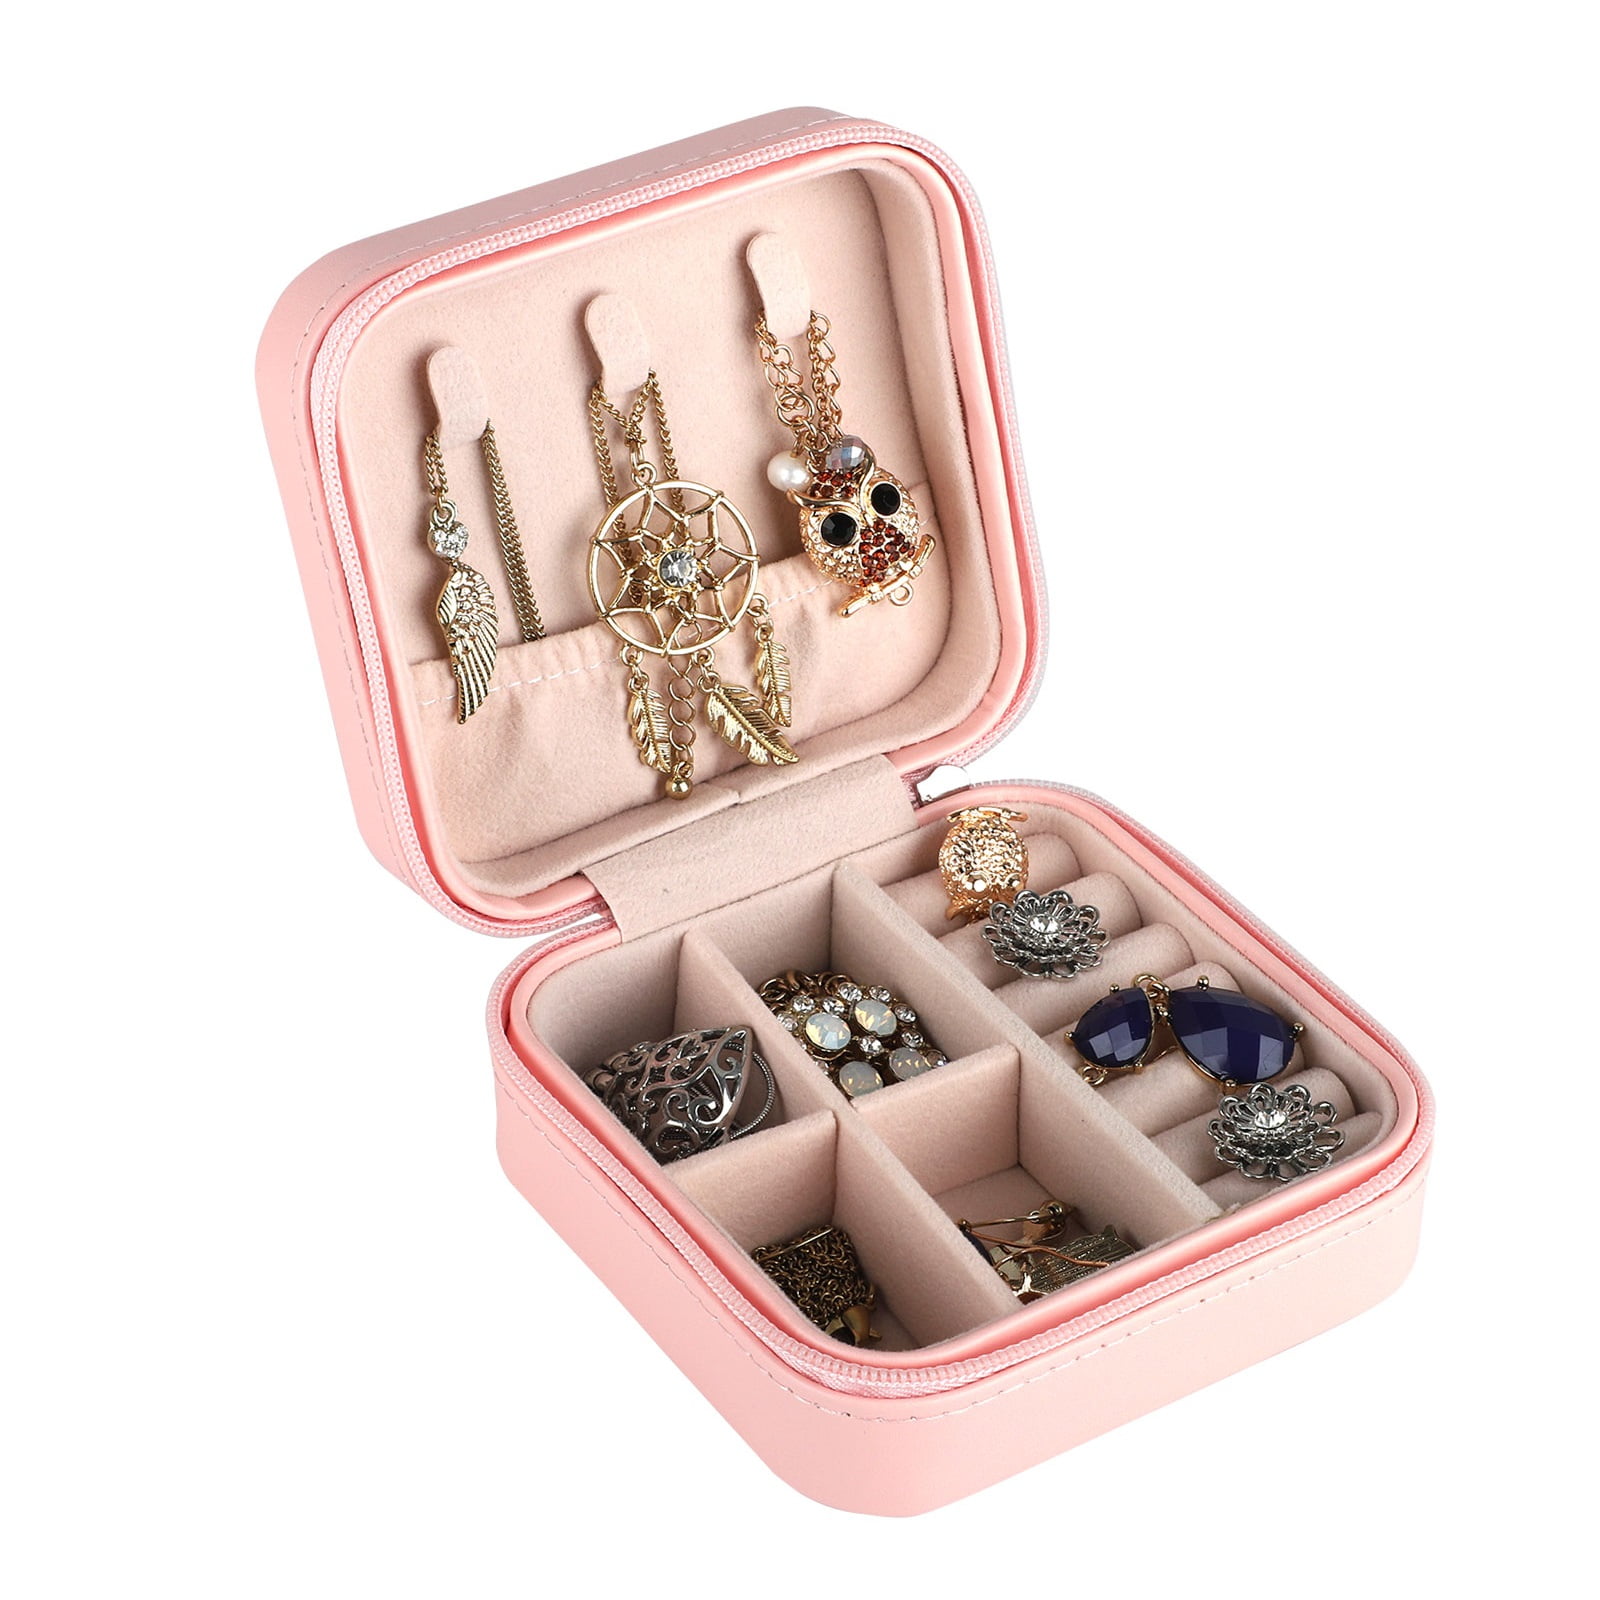 TSV Small Jewelry Box, Portable Travel Jewelry Organizer, Mini Display Case  with PU Leather for Girls Women Rings Earrings Necklaces Storage -  Walmart.com